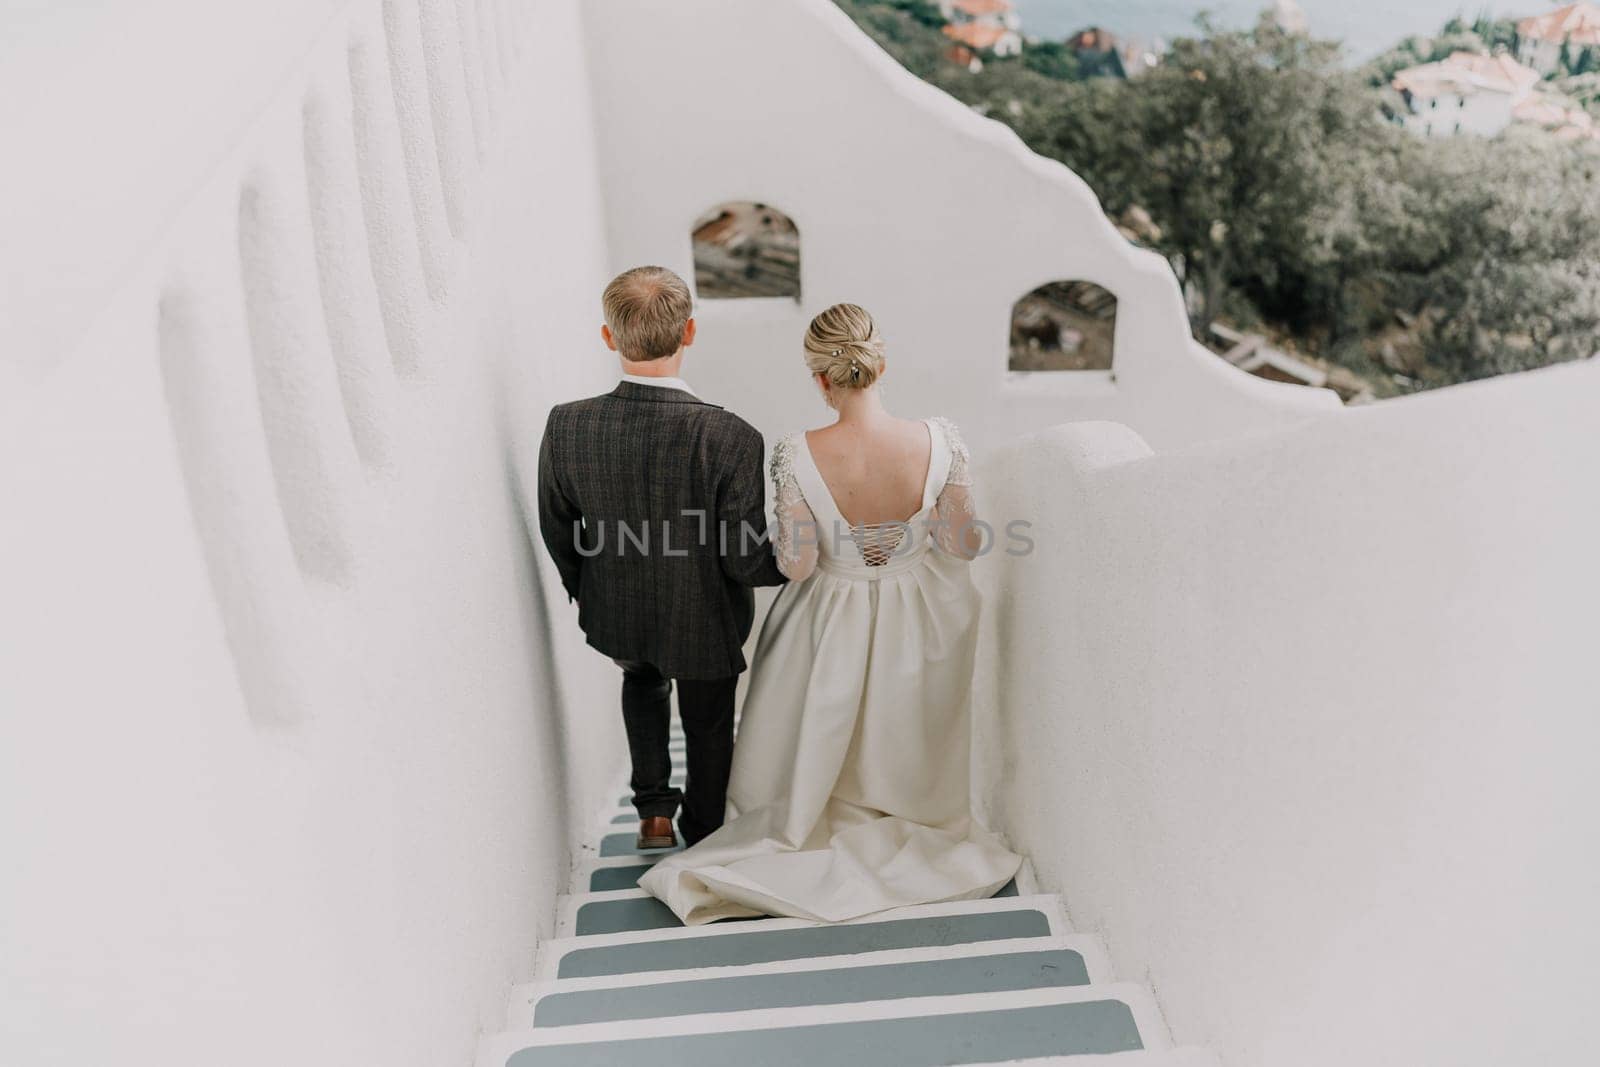 A bride and groom are walking down a white staircase. The bride is wearing a white dress and the groom is wearing a suit. by Matiunina